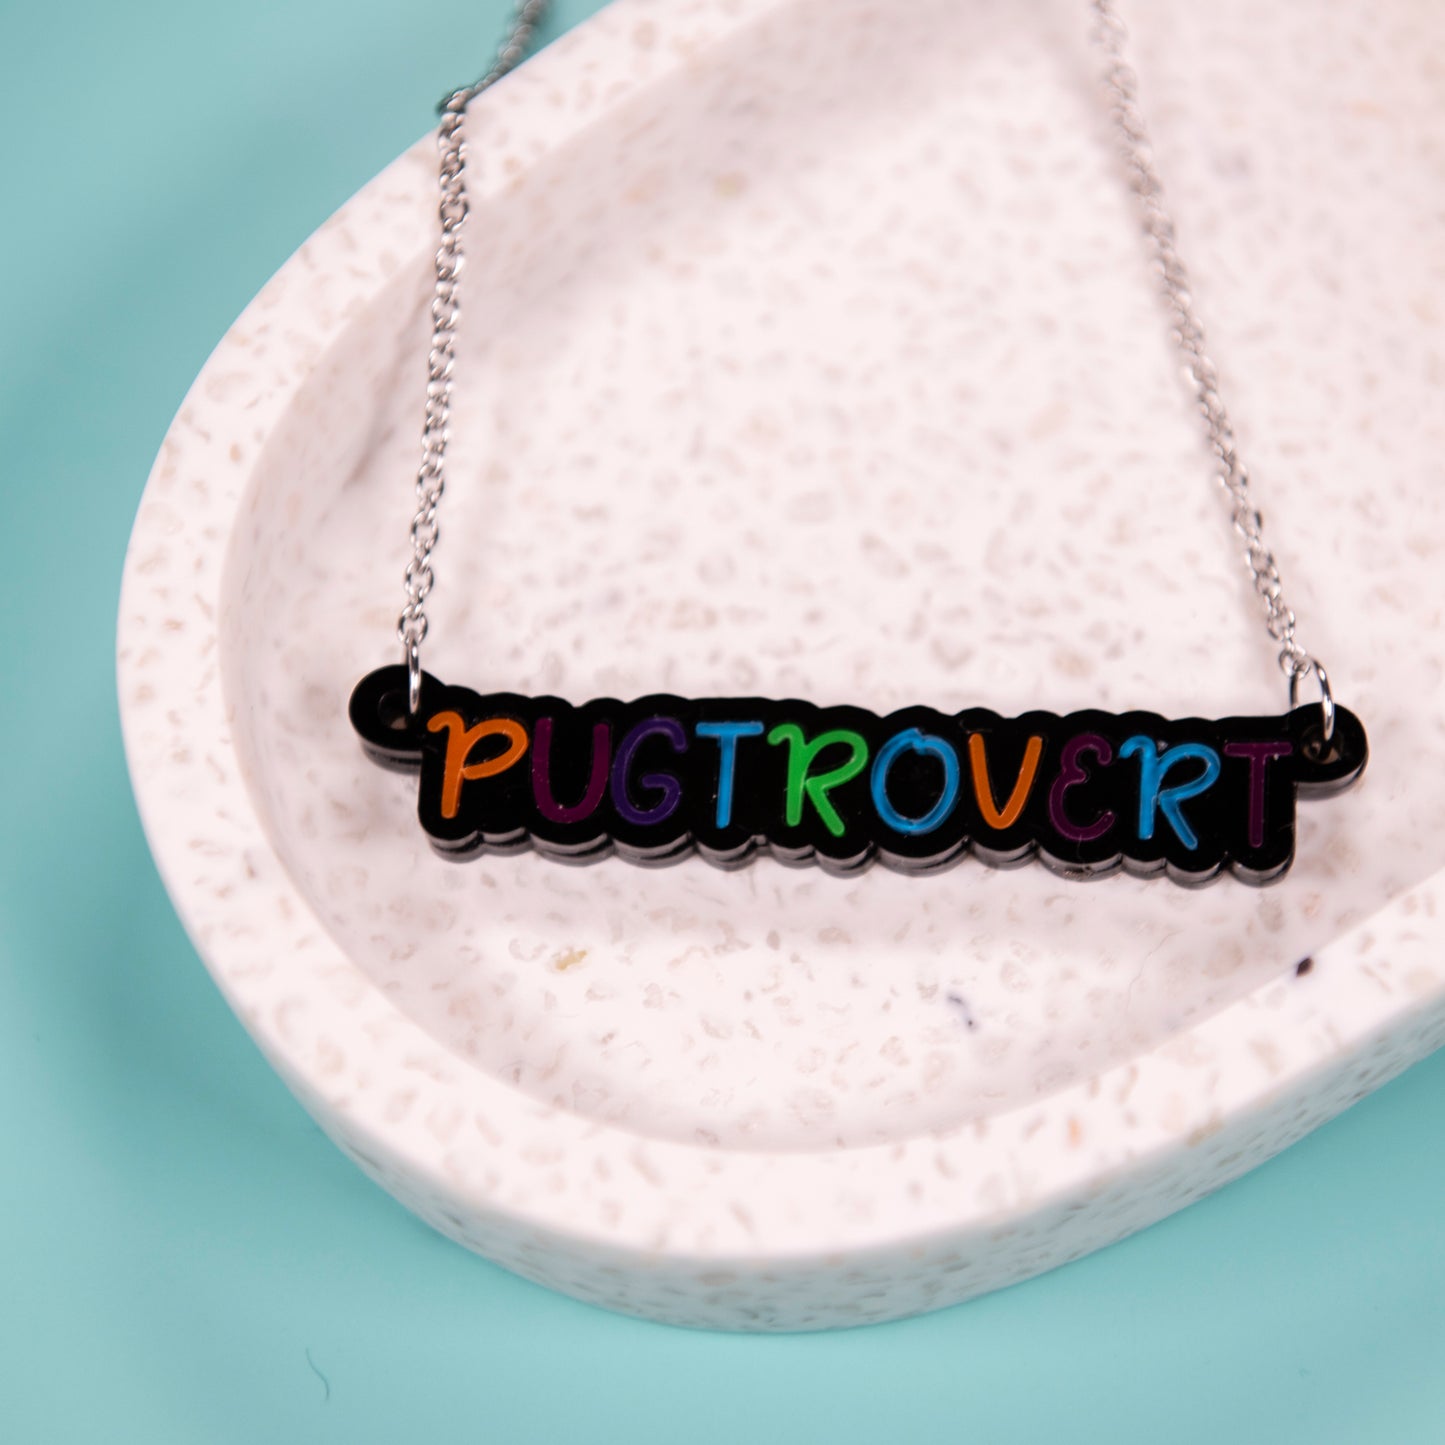 Pugtrovert Necklace